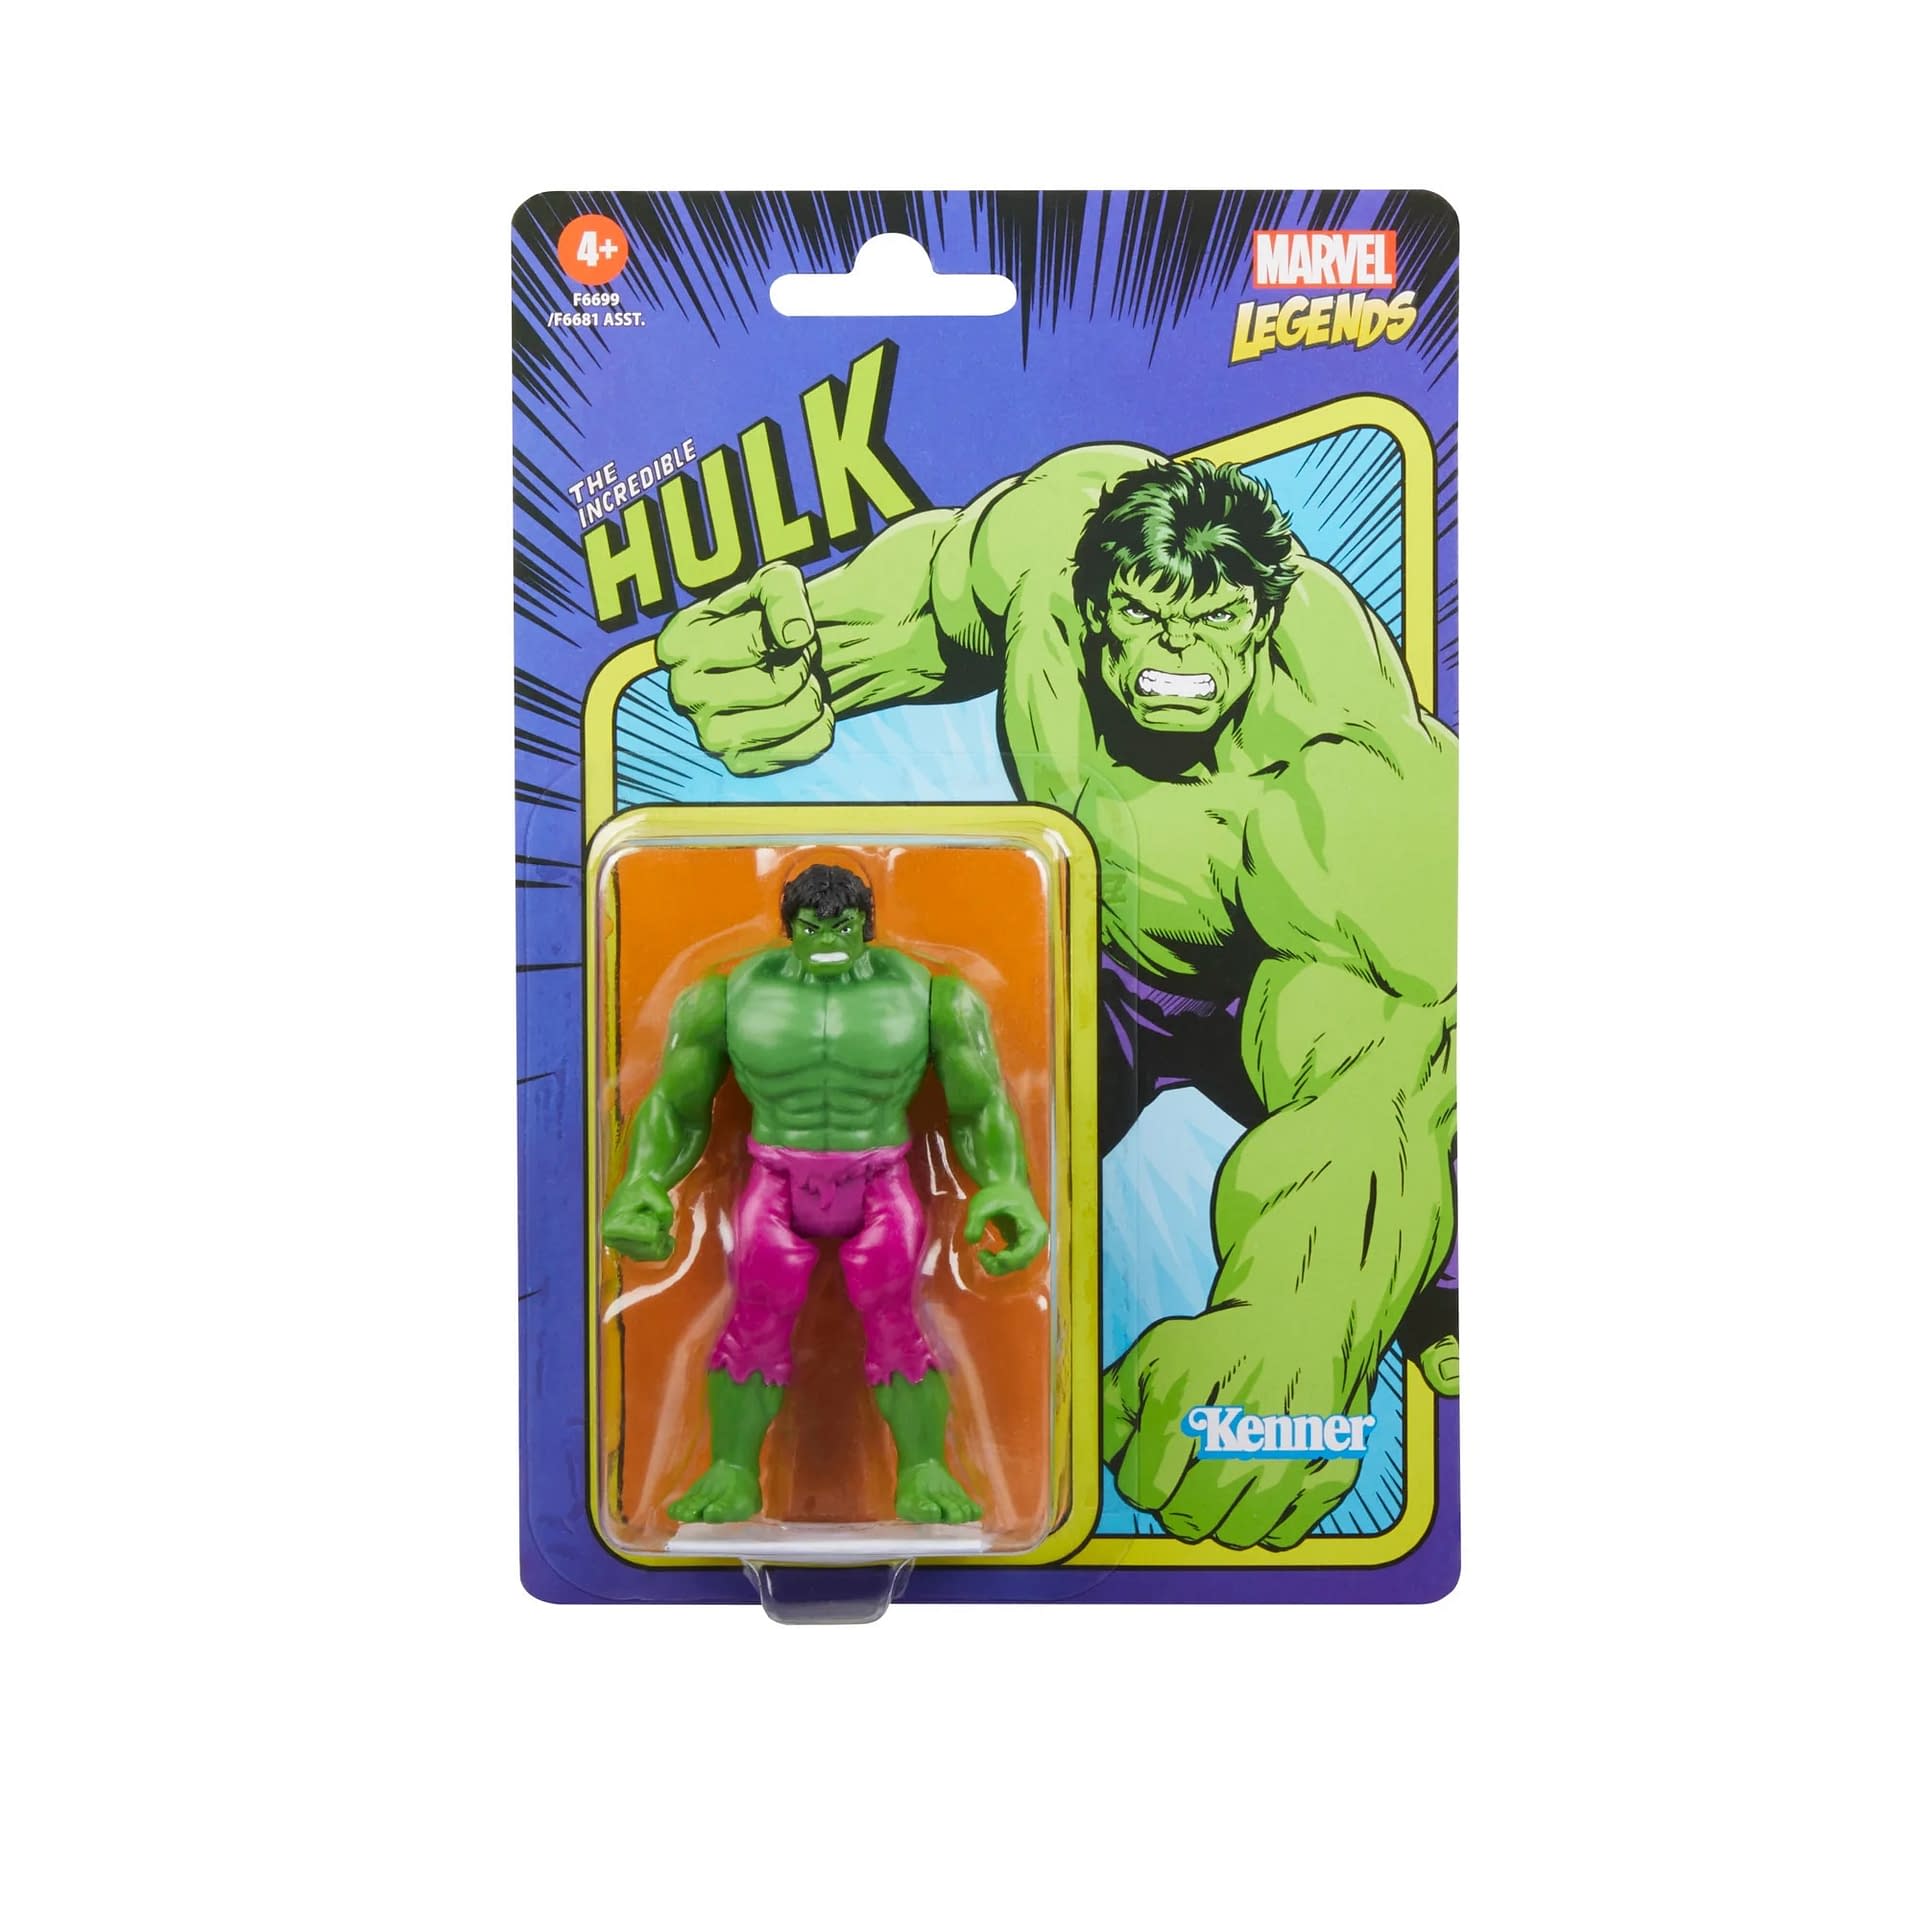 New Marvel Legends Retro 375 Figures Coming Soon from Hasbro